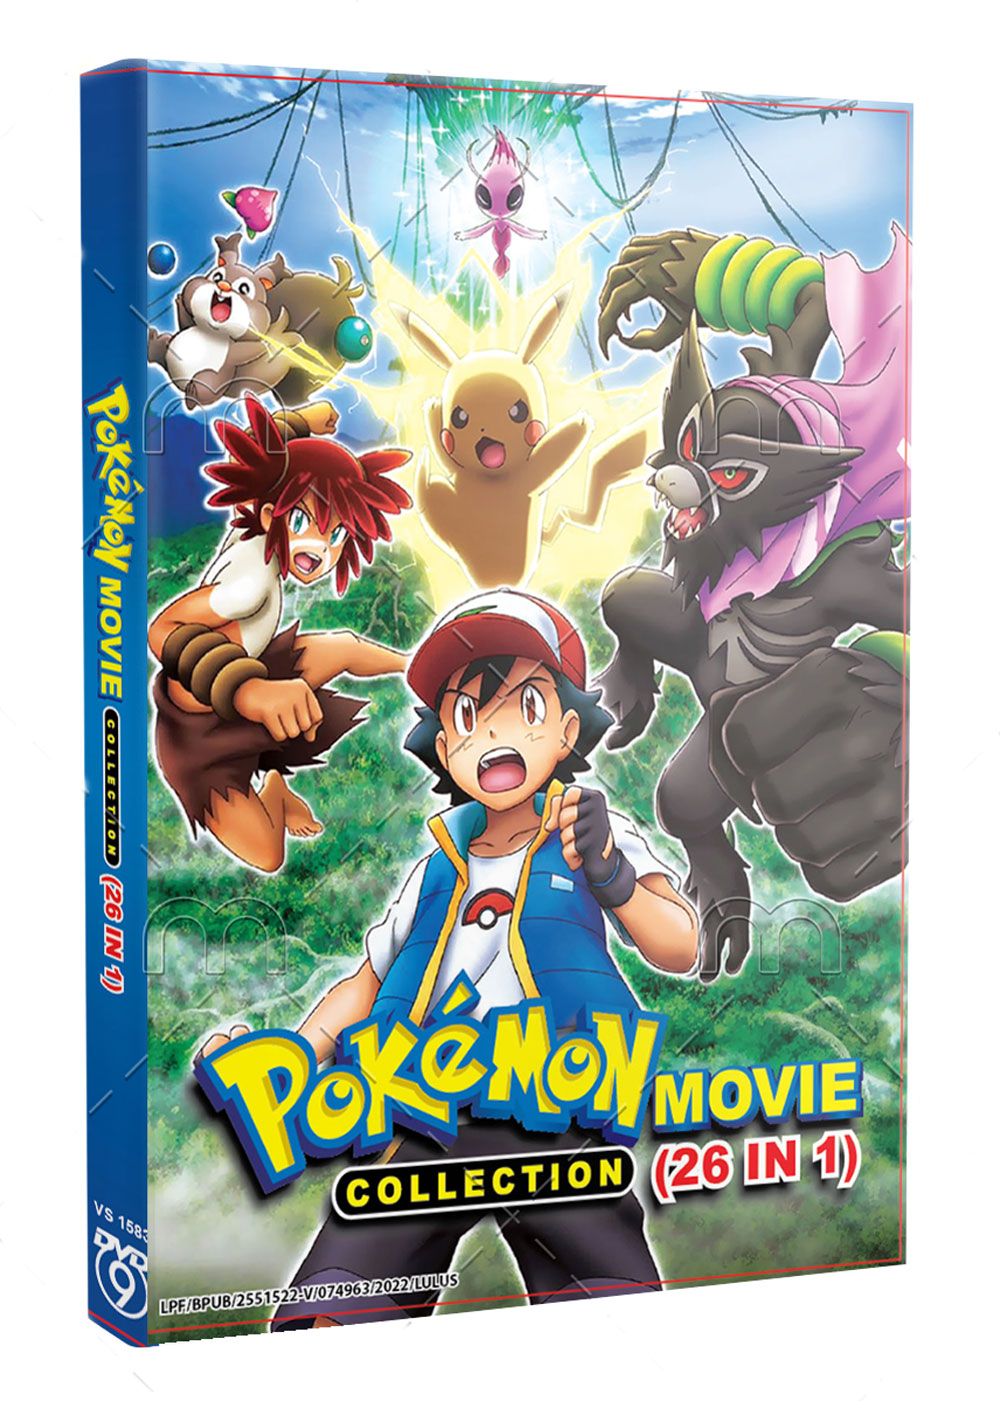 Pokemon Movie Collection (26 IN 1) (DVD) (1998-2019) 动画